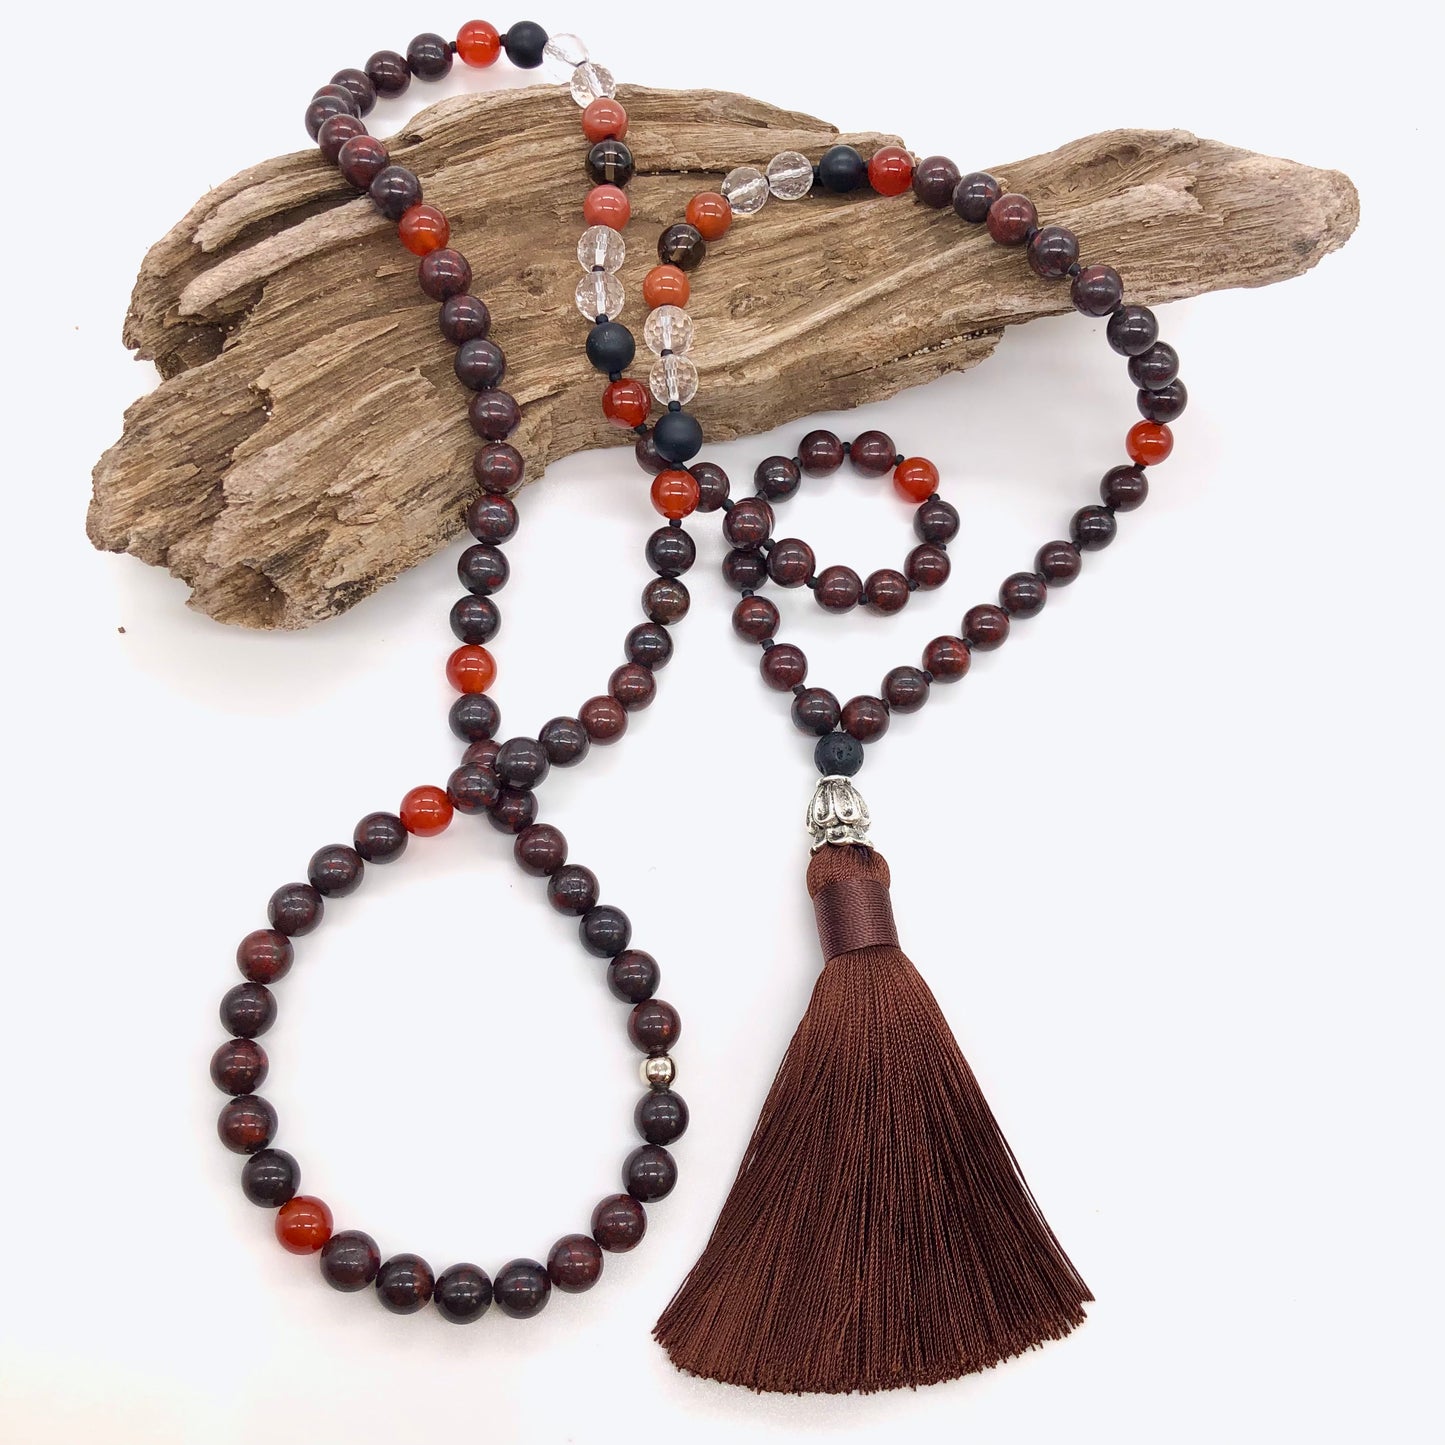 Red jasper necklace with tassel on top of wood